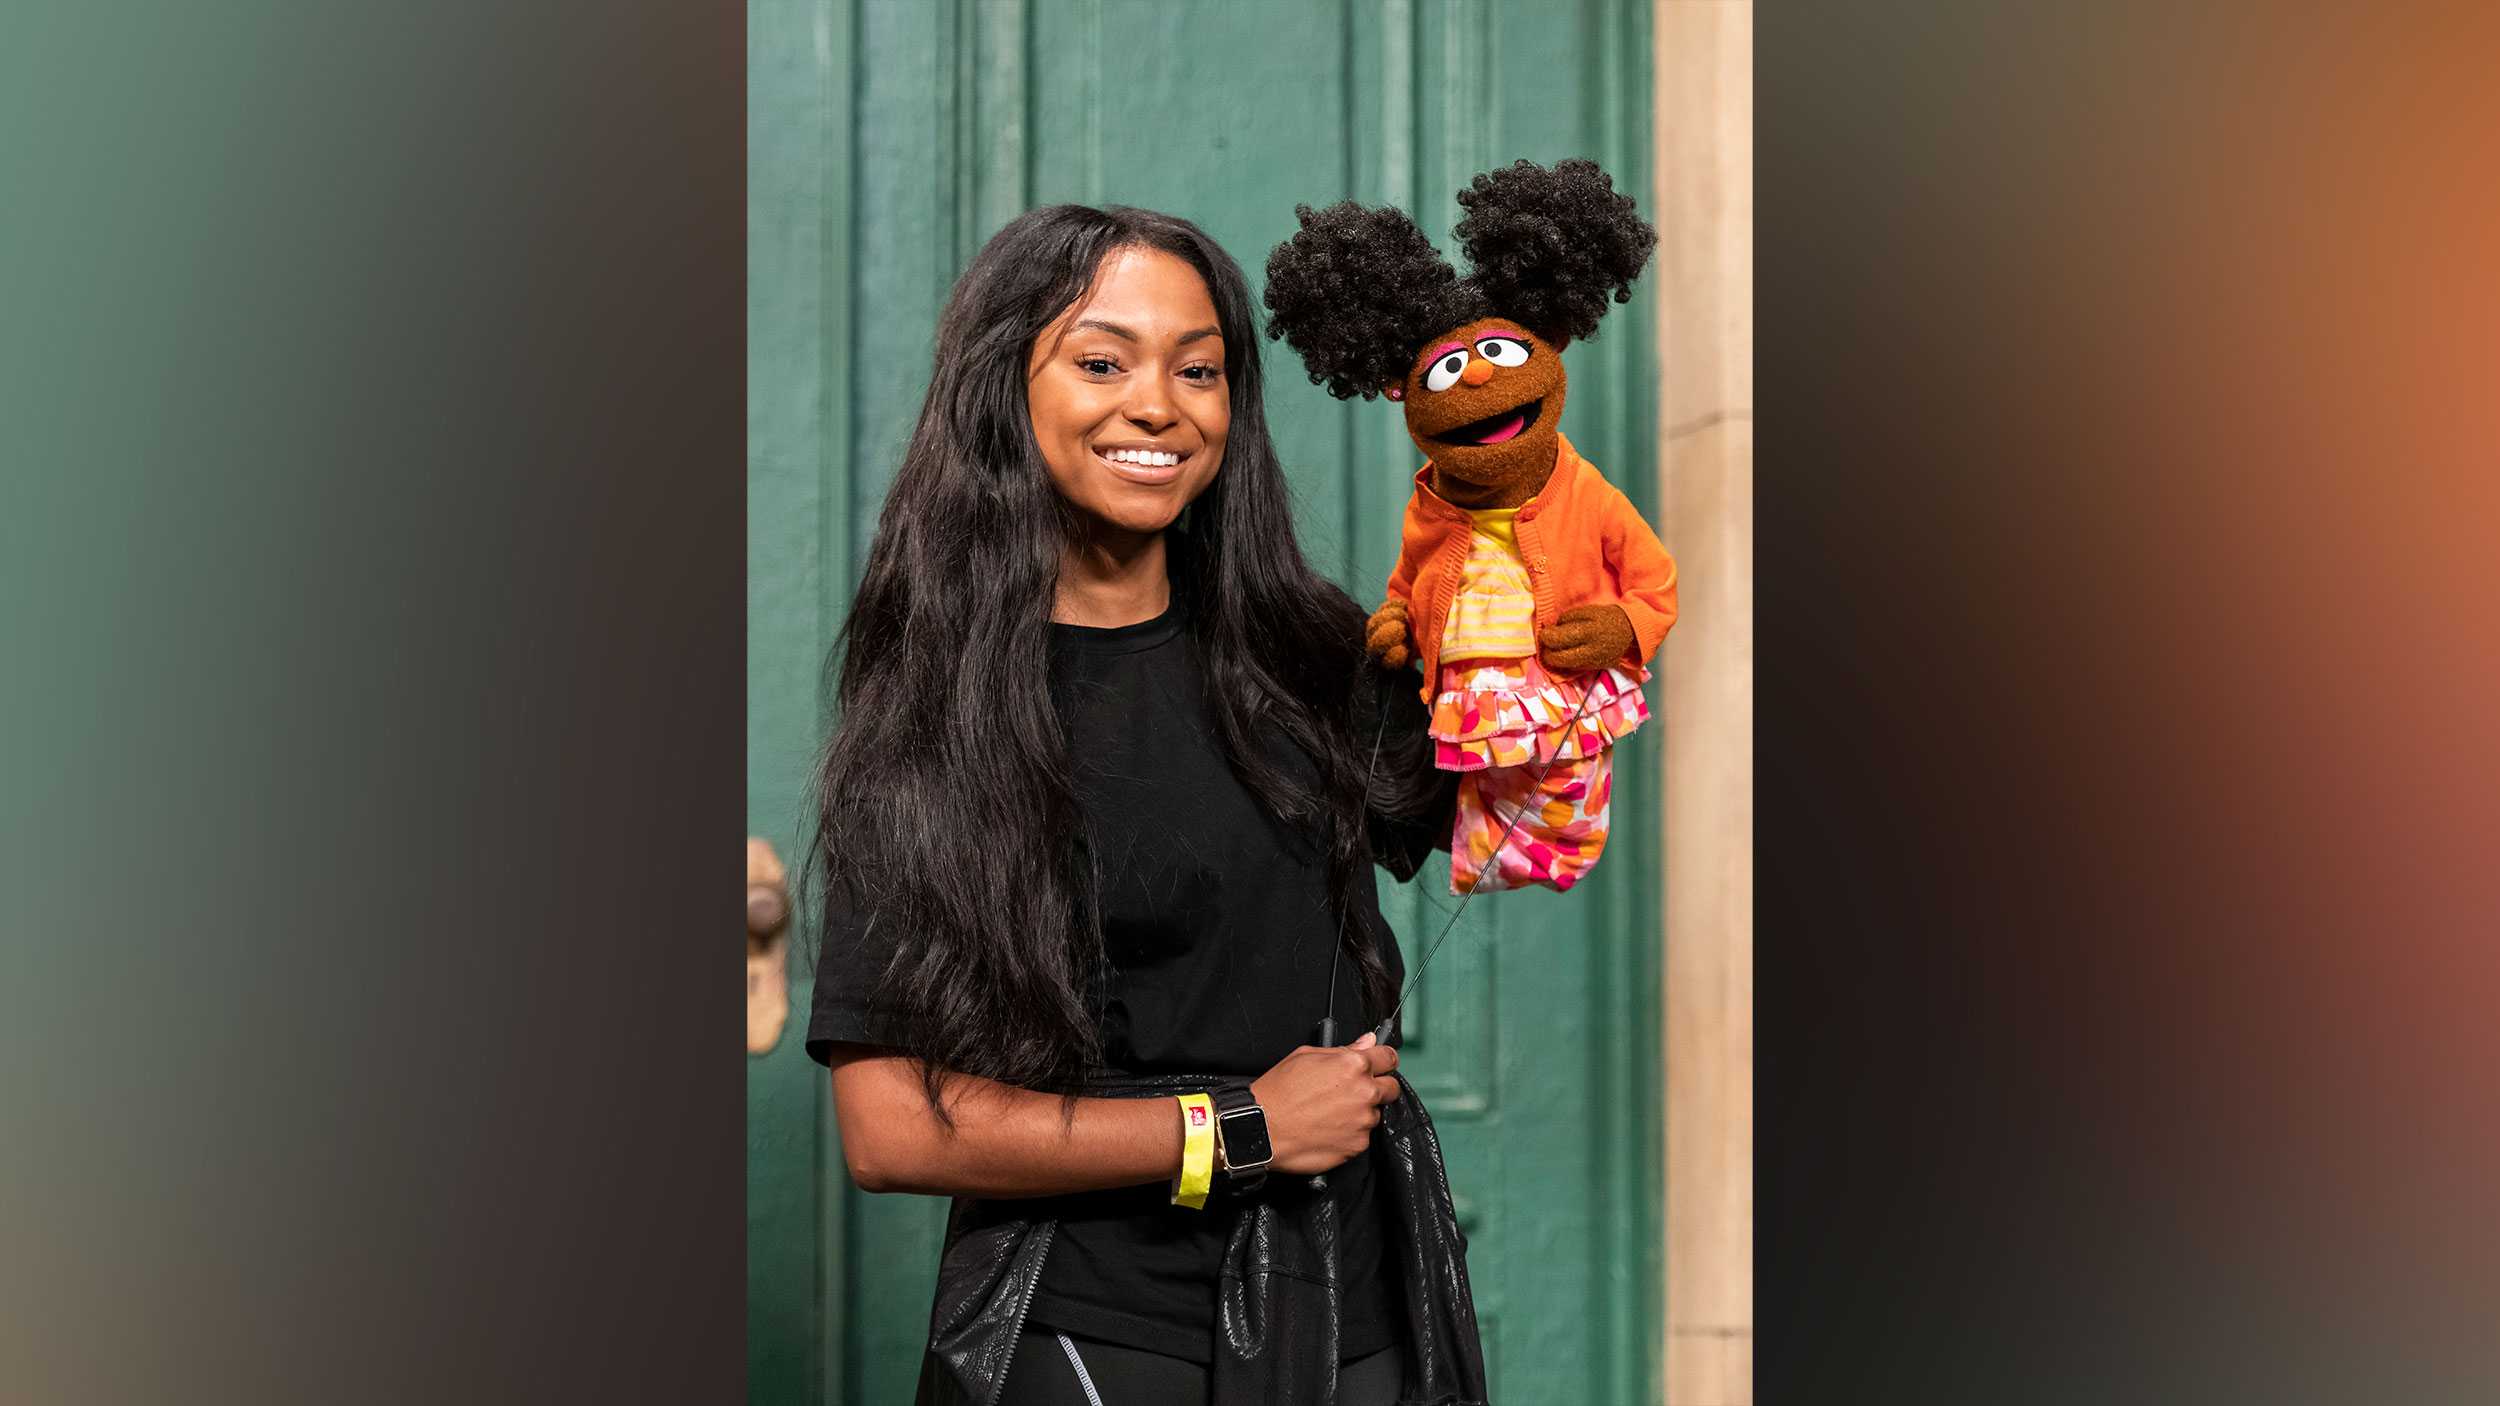 She grew up watching 'Sesame Street.' Then she made history as the show's first Black female puppeteer